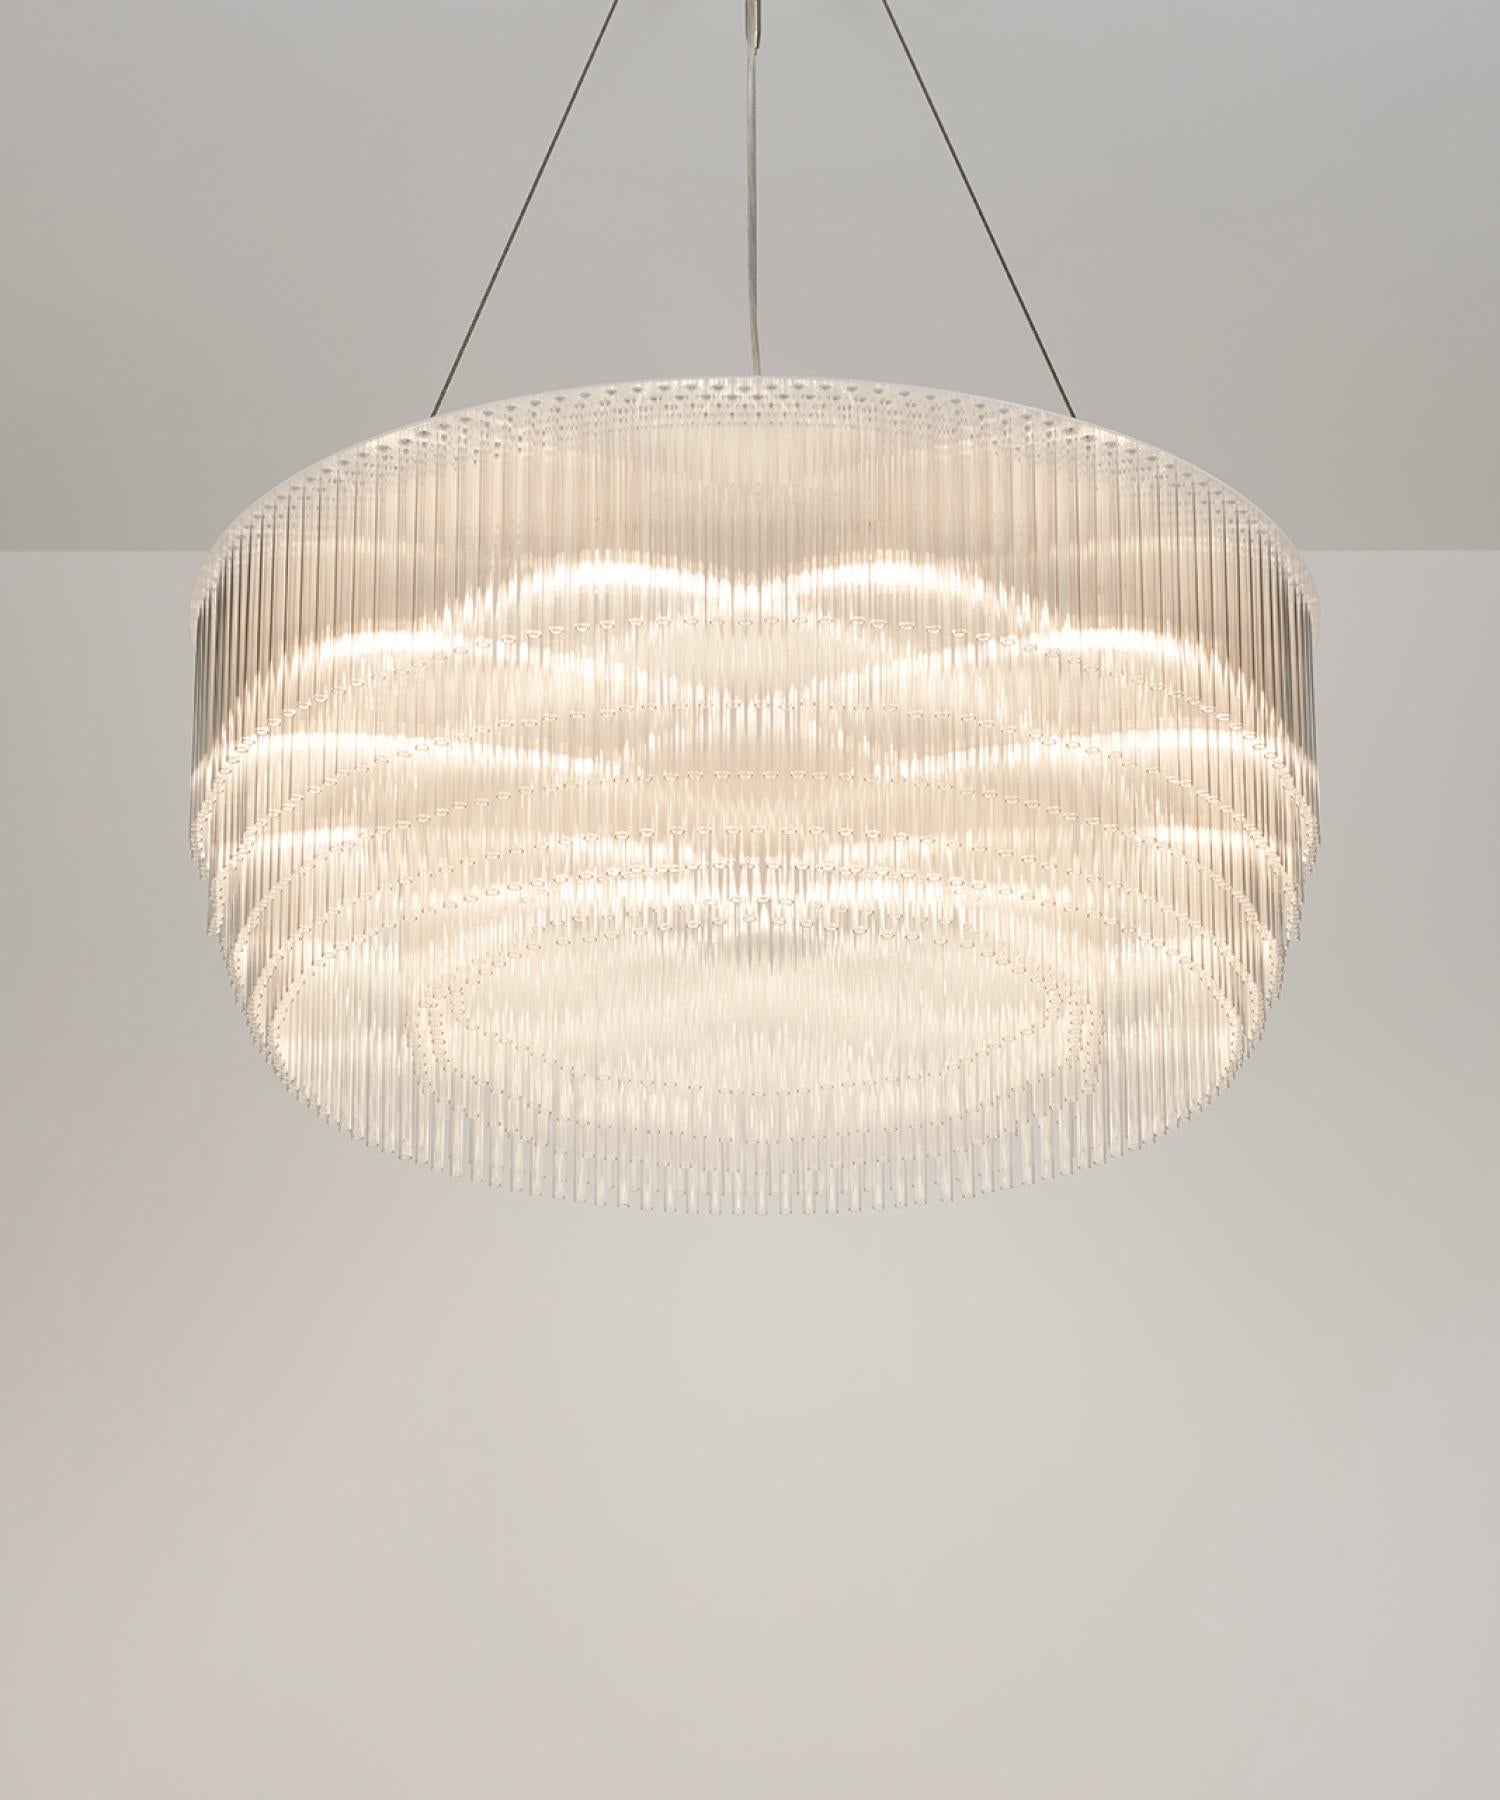 The magnificent five-tier Ring Chandelier combines a mesmerising arrangement of light and pattern. This special light is available in four different diameters ranging from 750mm to 1500mm. Strong, graceful and unique, it is designed to be the focal